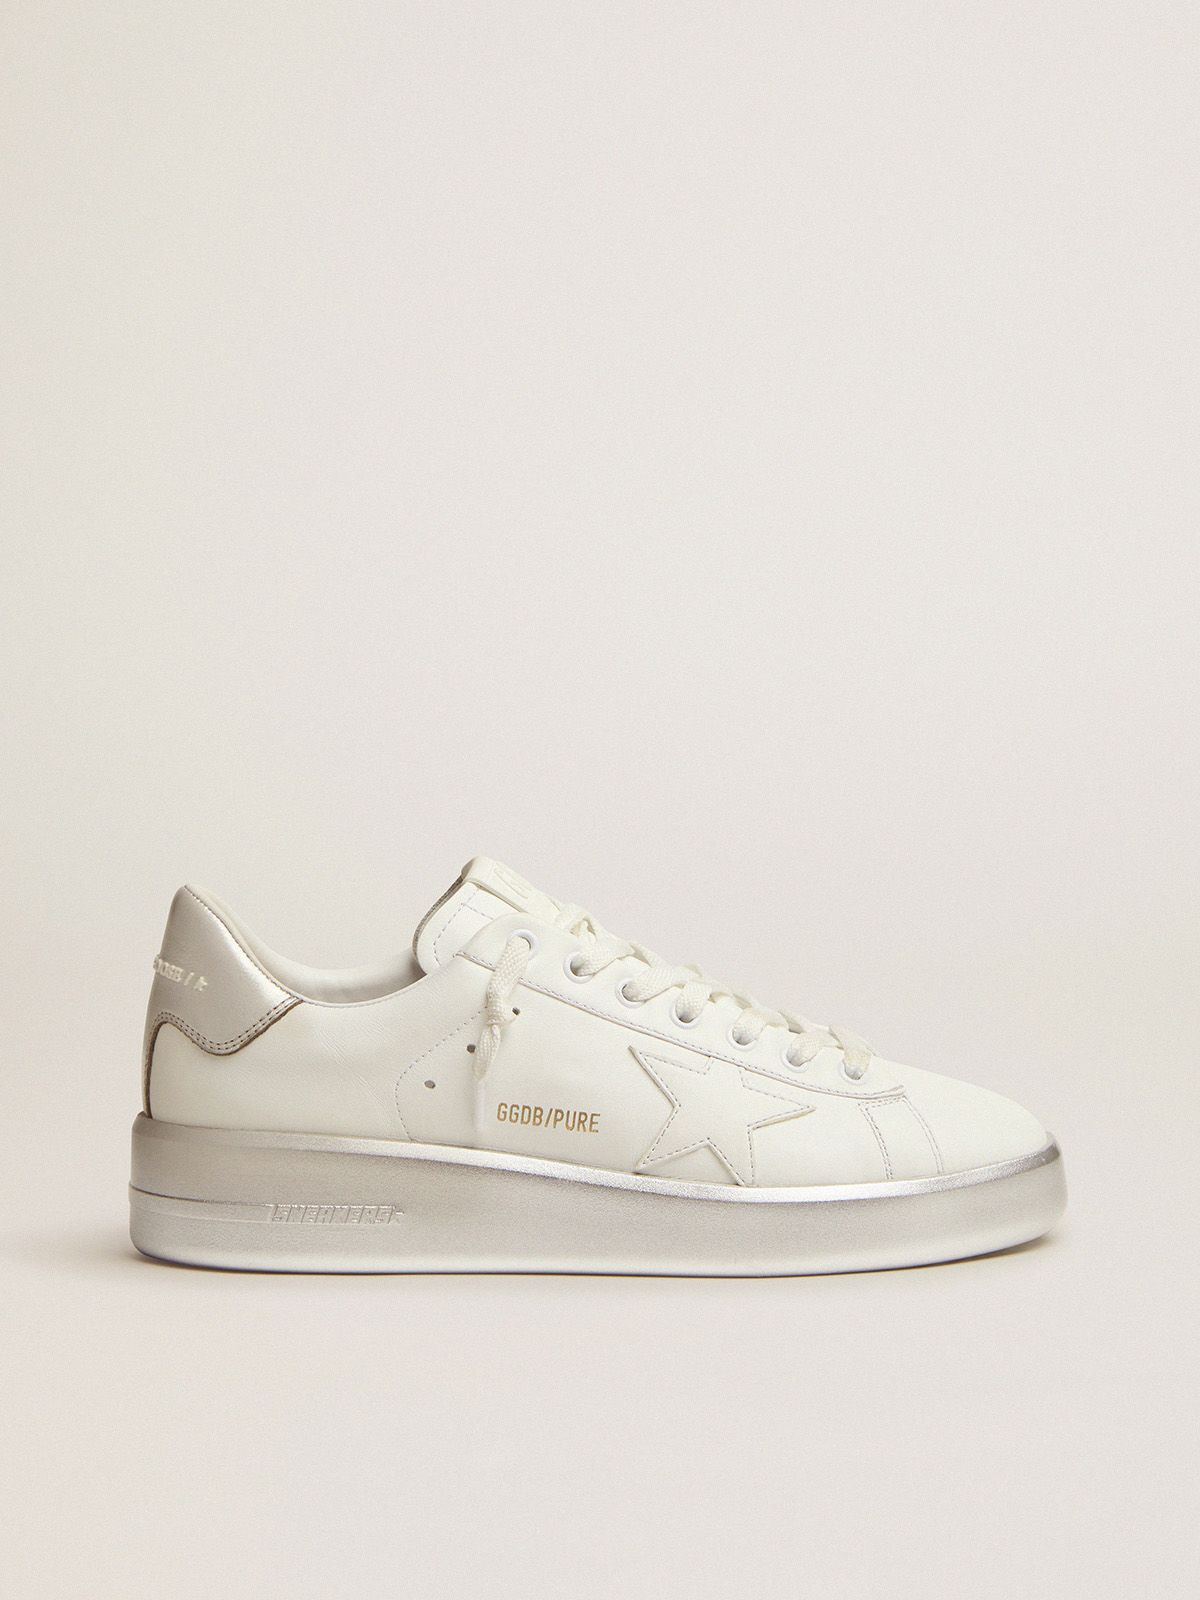 golden goose white laminated with and in leather heel foxing Purestar sneakers tab silver